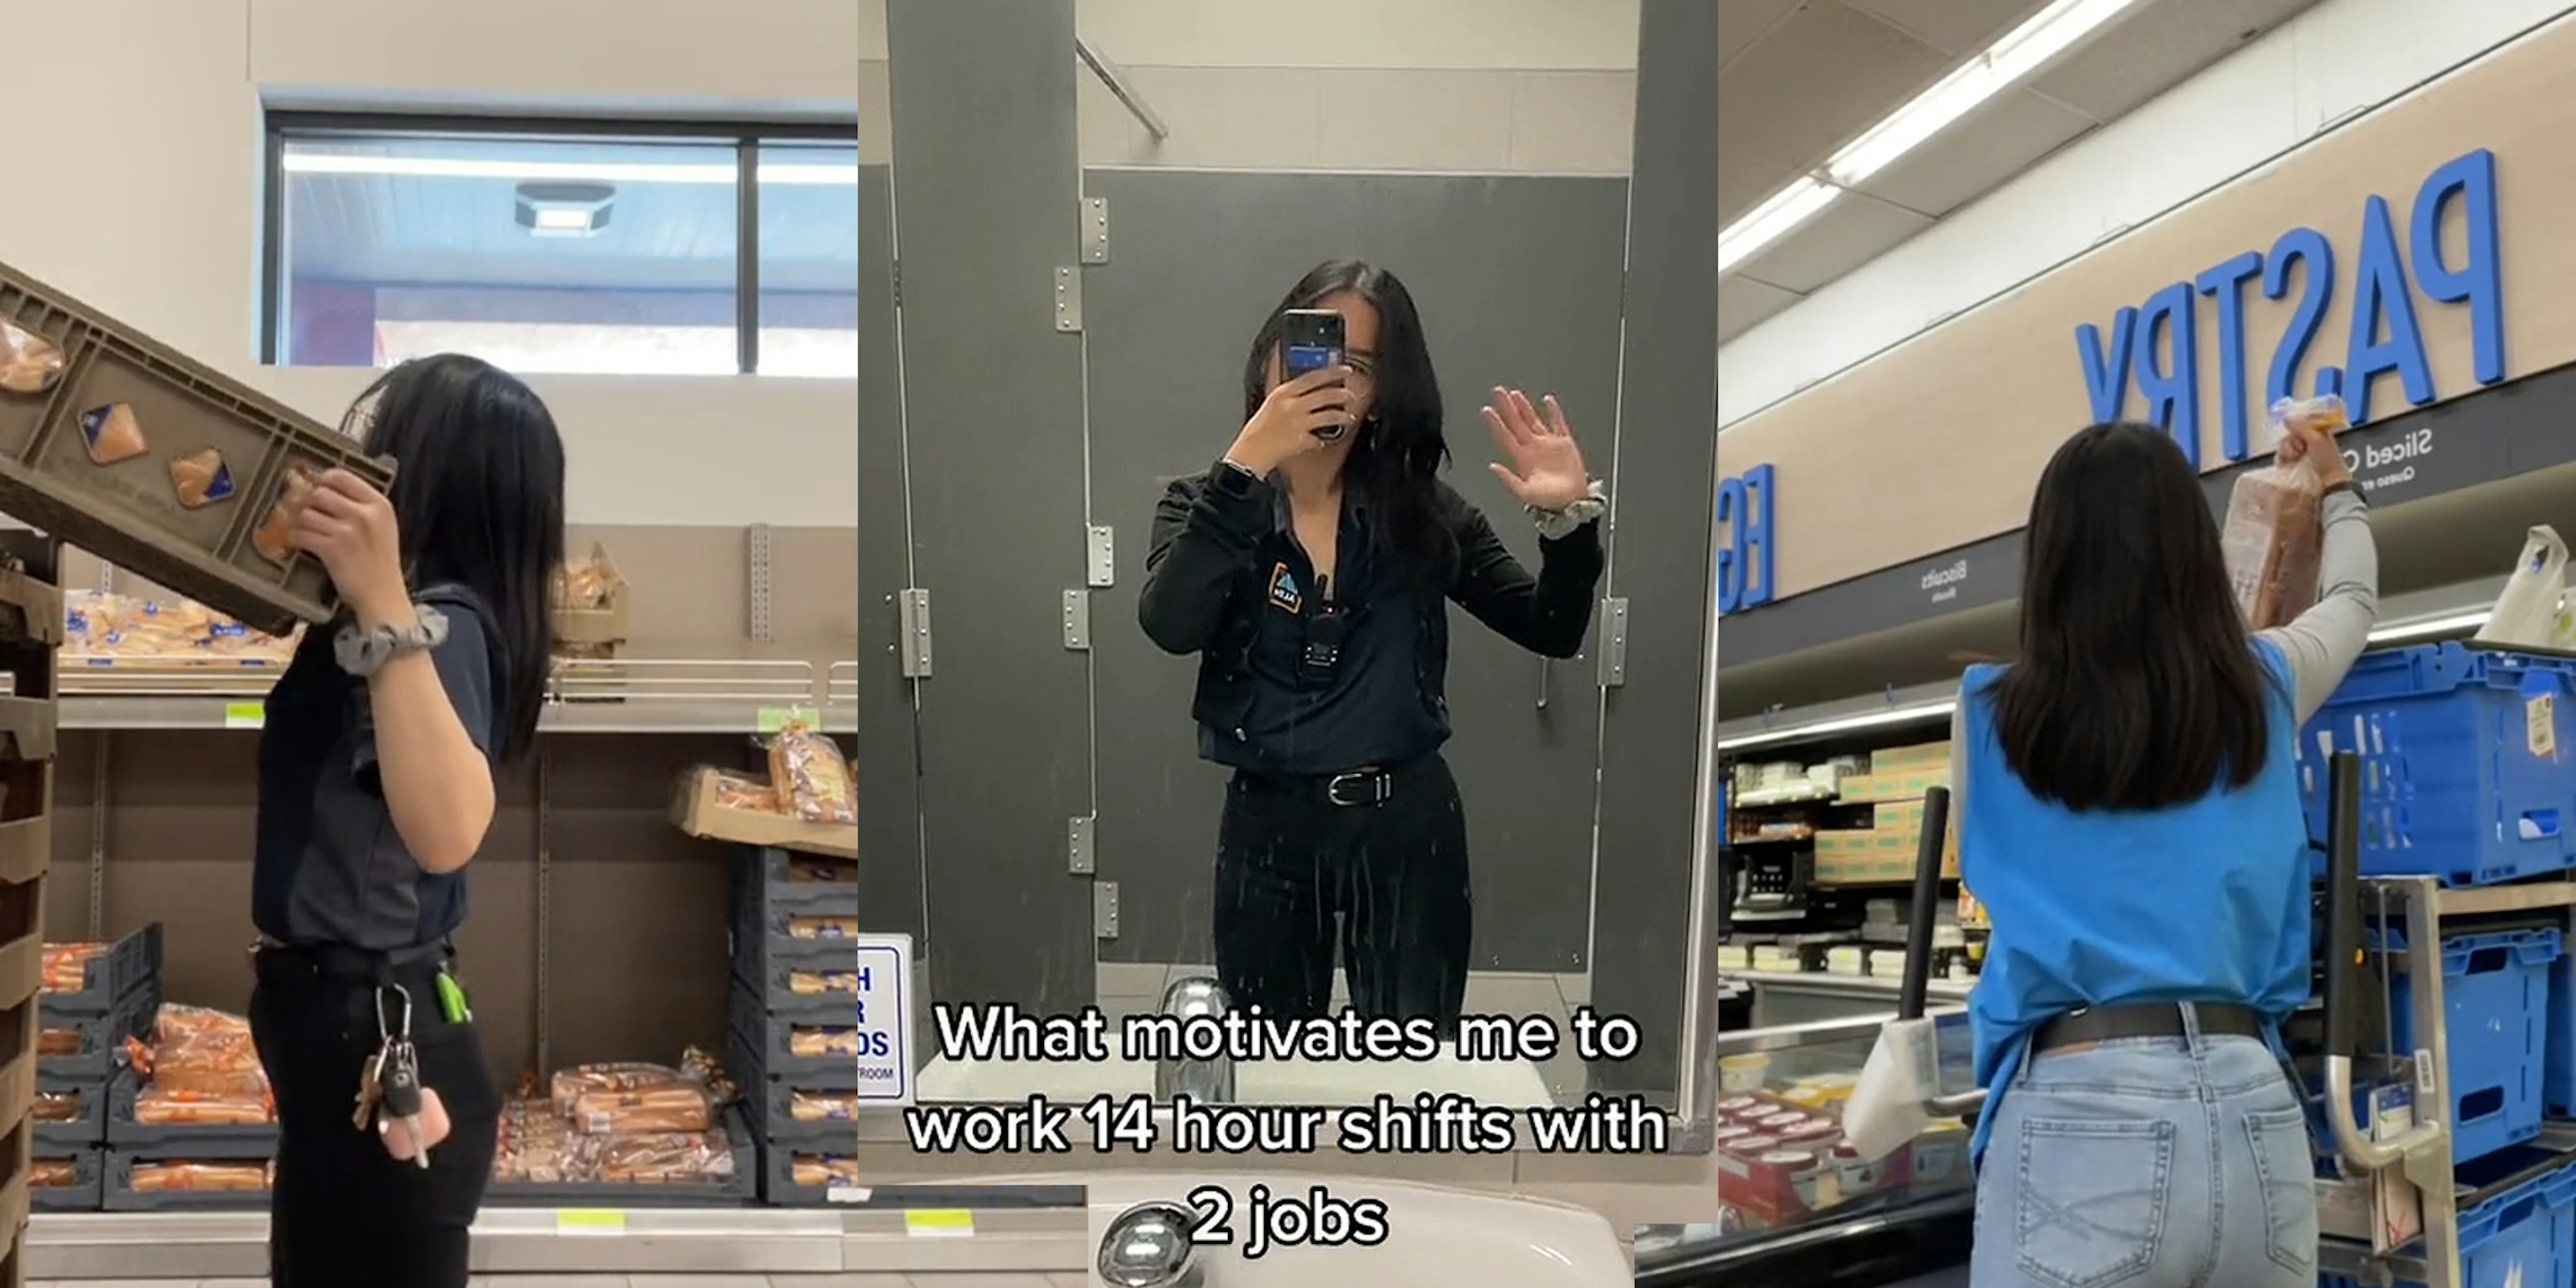 Worker lifting crate of bread (l) woman posing in mirror arm up waving caption 'What motivates me to work 14 hour shifts with 2 jobs' (c) Walmart worker holding bread (r)